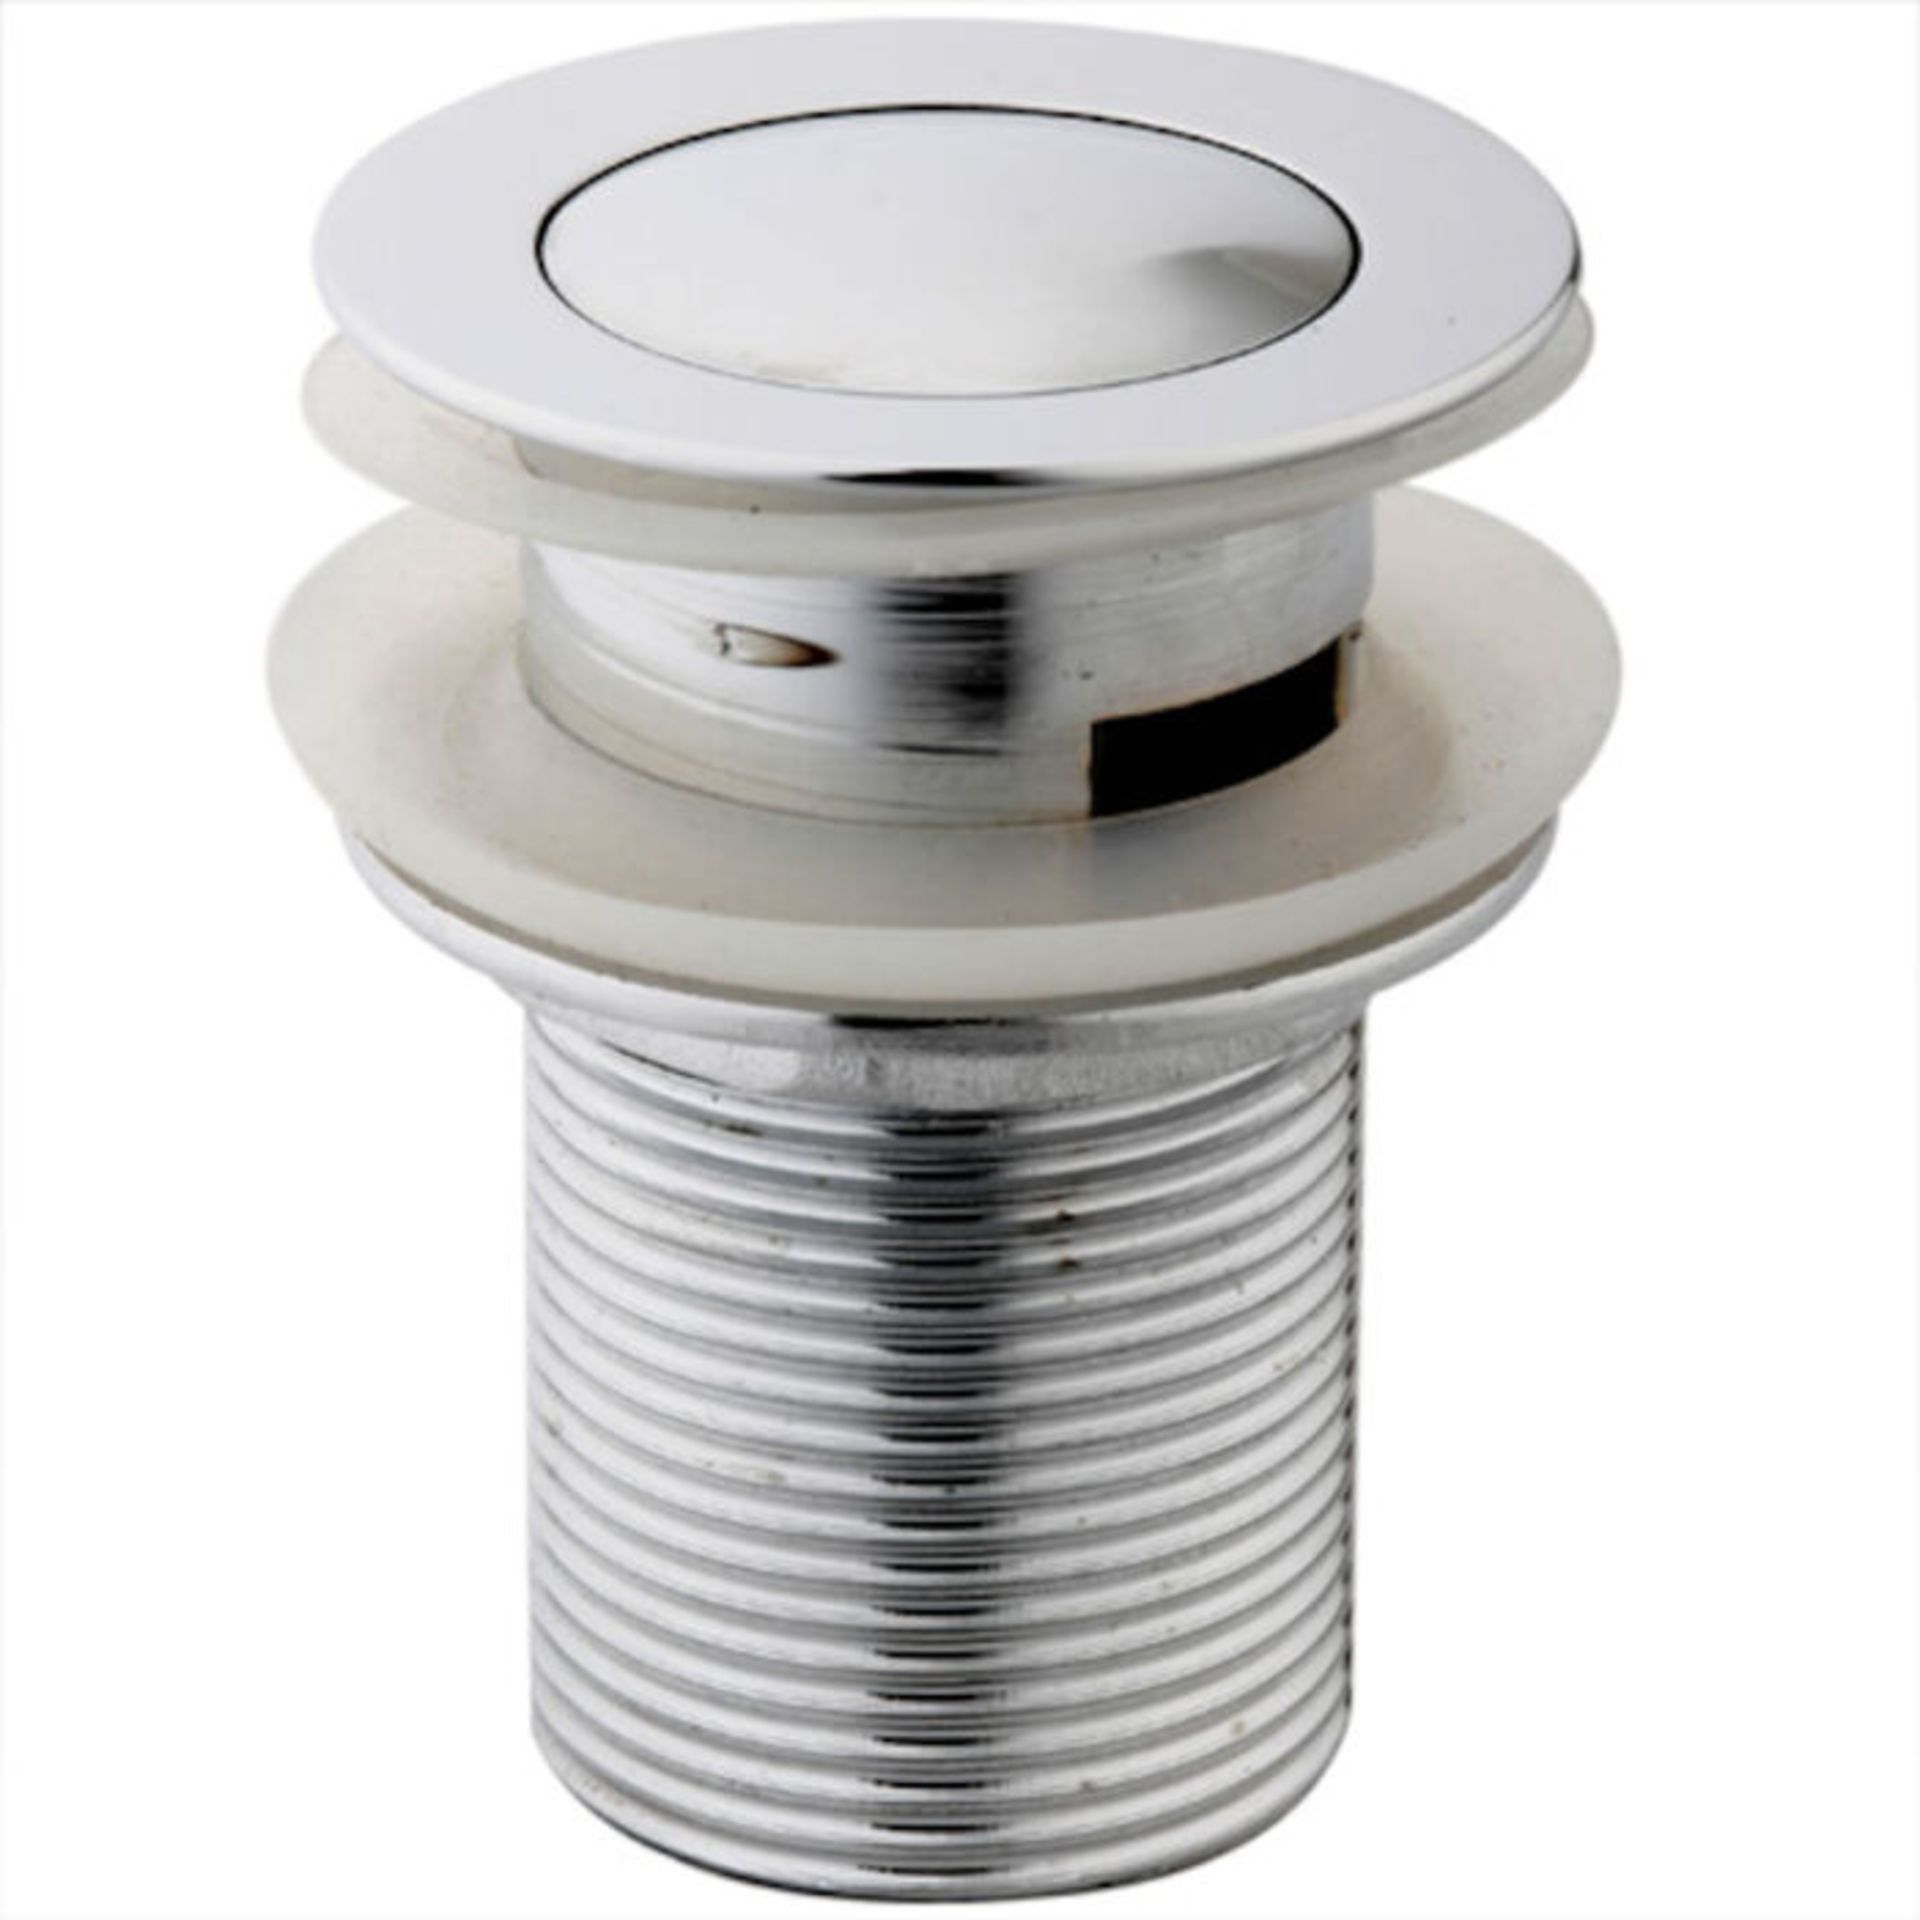 (E1002) Basin Waste - Slotted Push Button Pop-Up Made with zinc with solid brass components S...